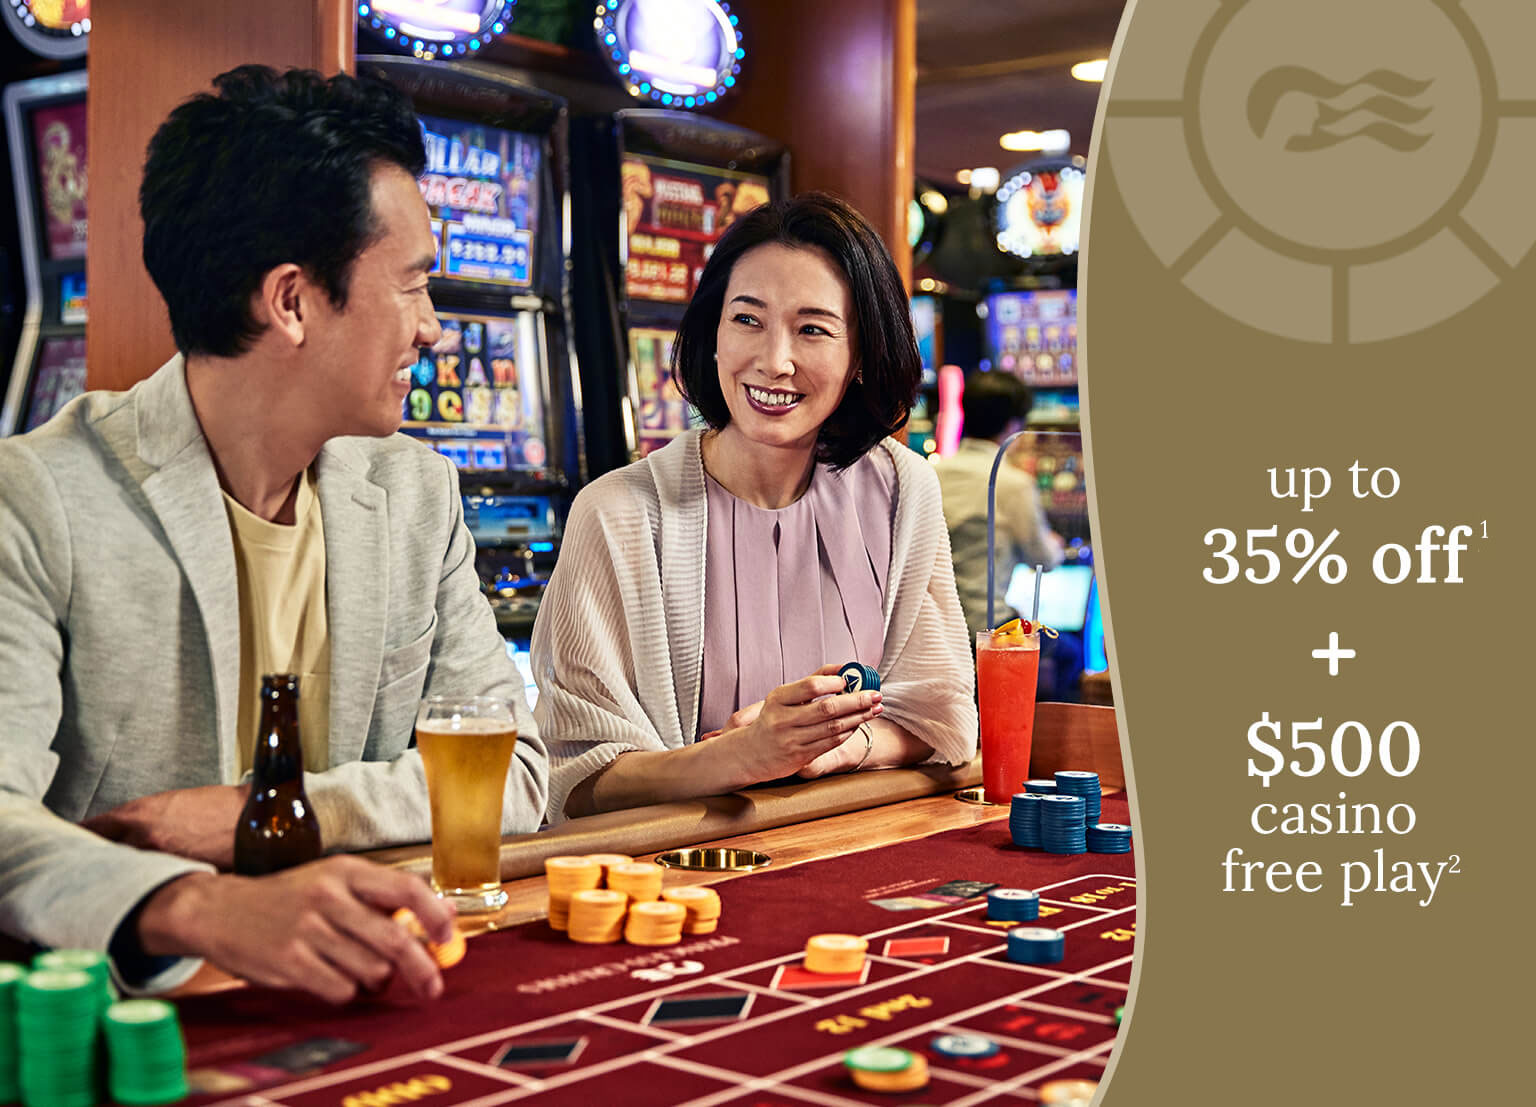 free balcony stateroom1 + $500 casino free play2 - princess plus with drinks, Wi-fi & incentive included